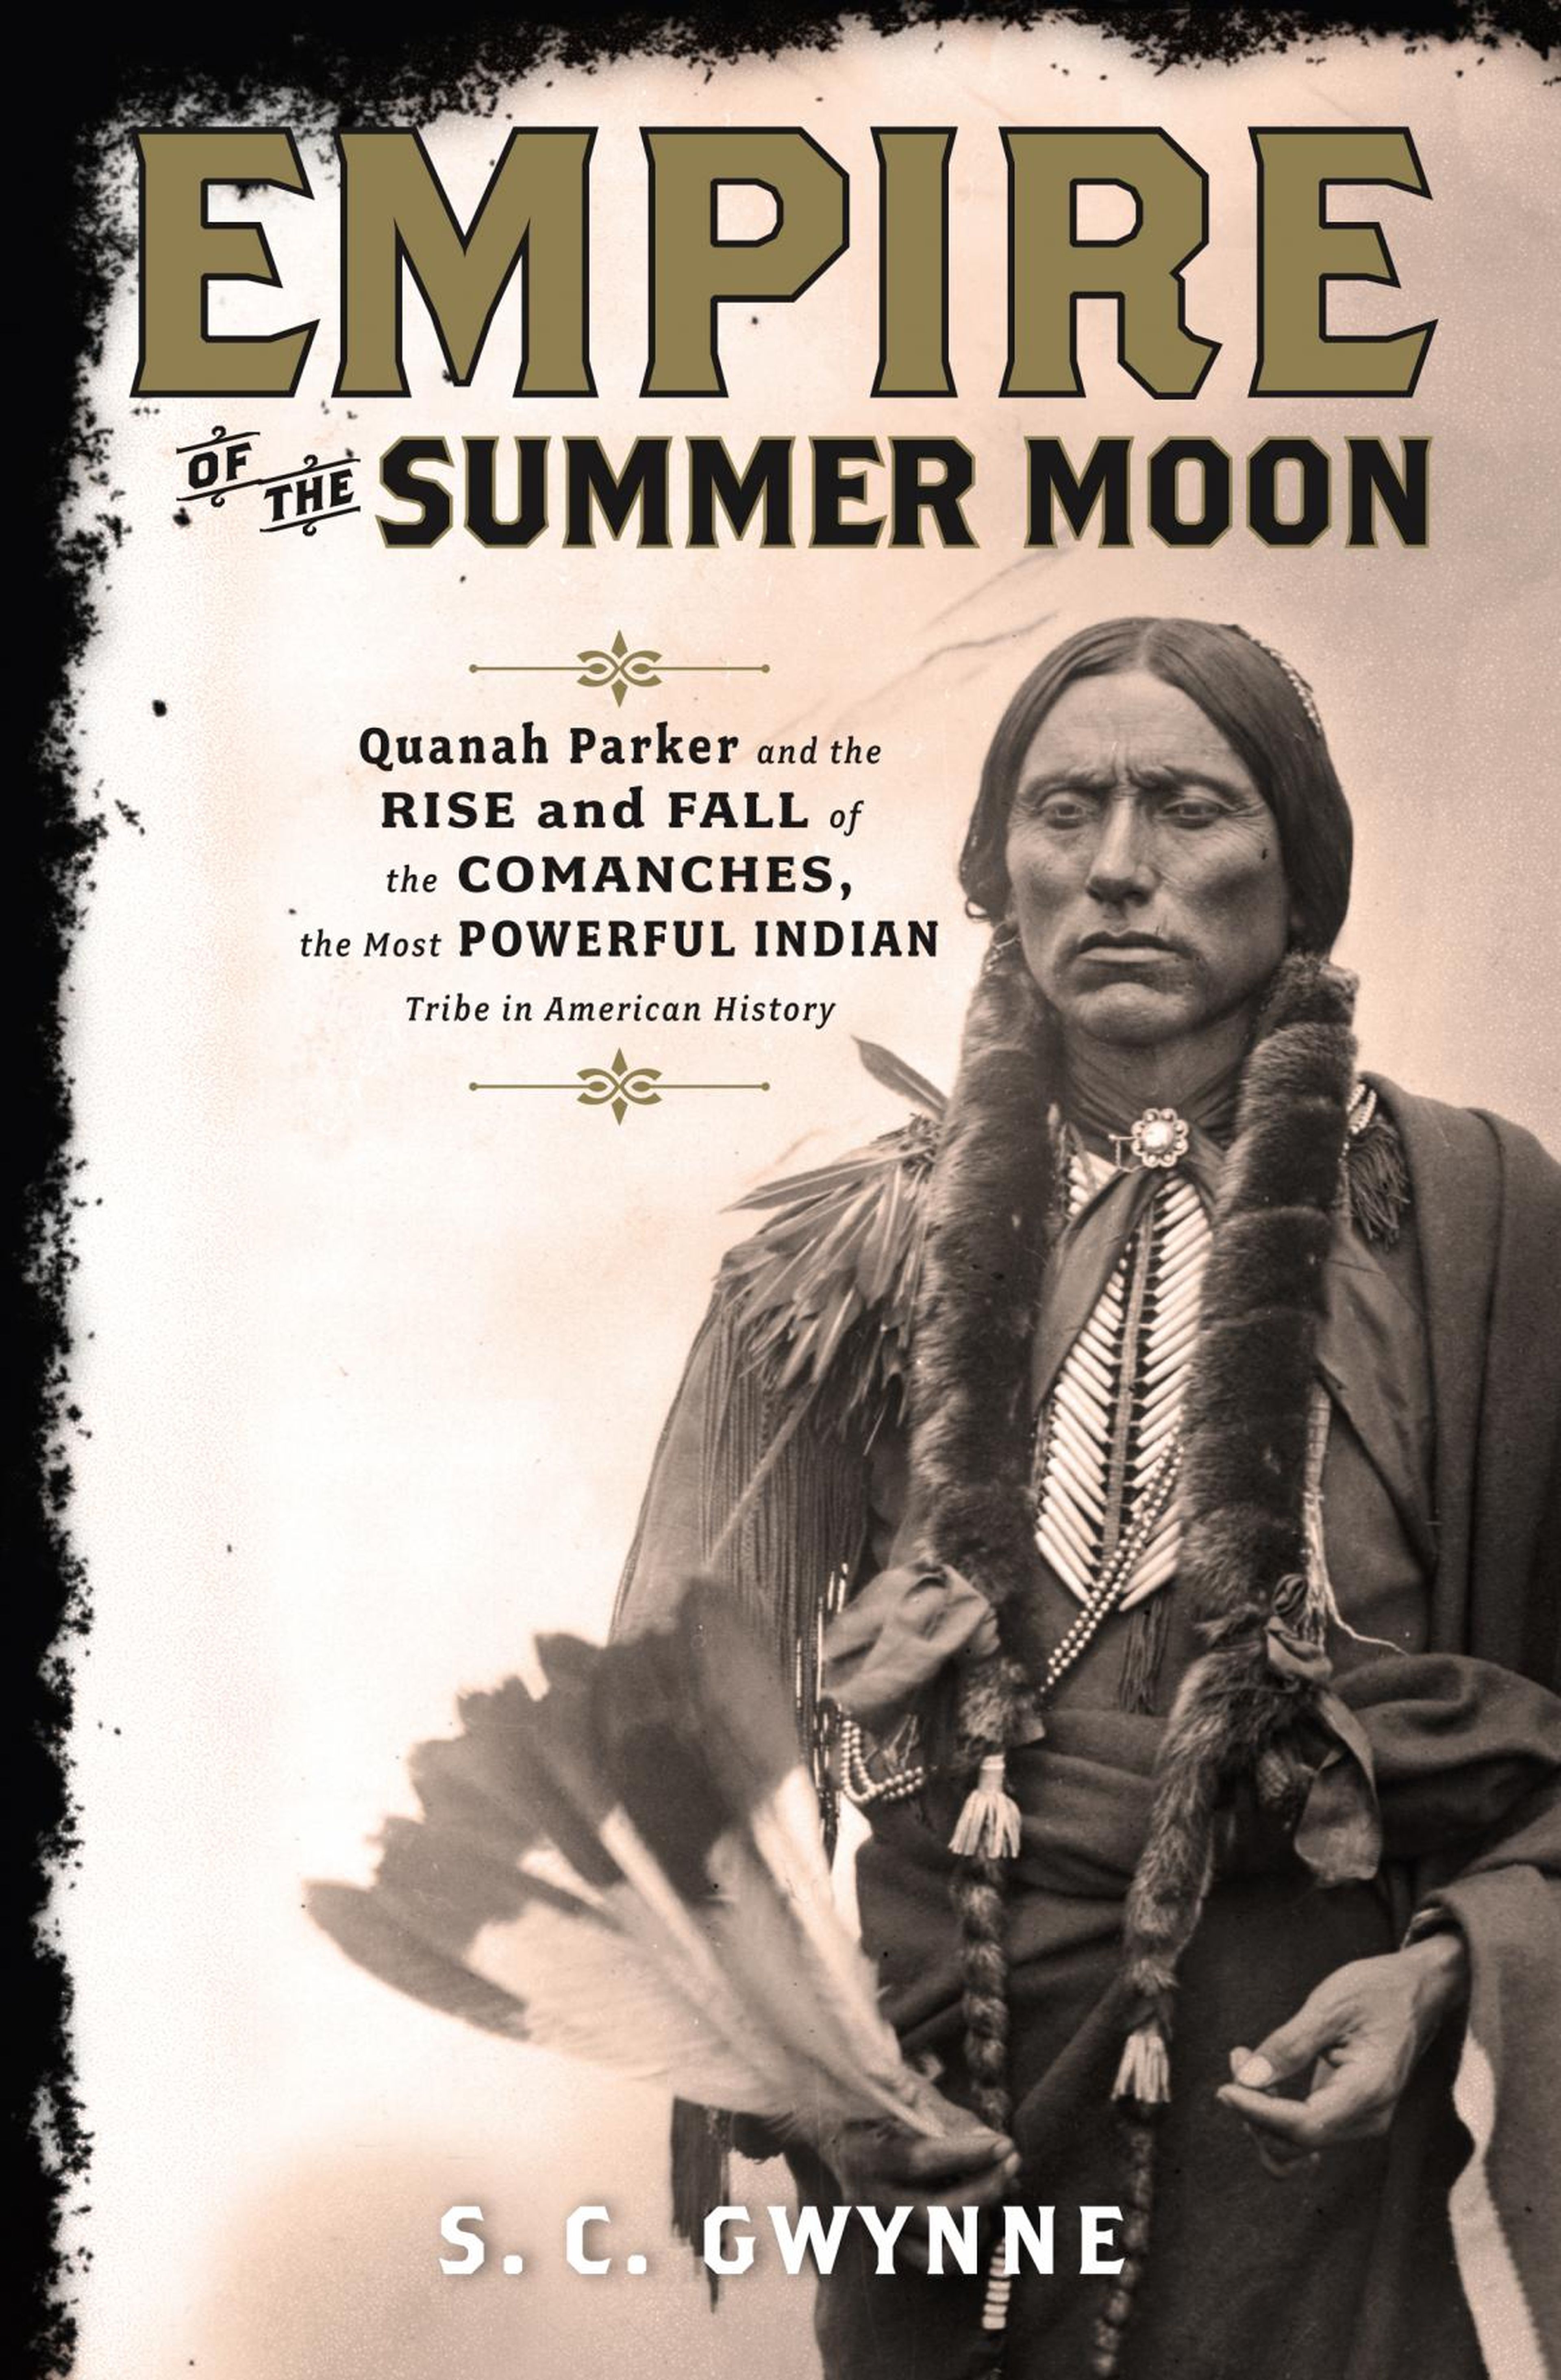 "Empire of the Summer Moon: Quanah Parker and the Rise and Fall of the Comanches, the Most Powerful Indian Tribe in American History" by S.C. Gwynne